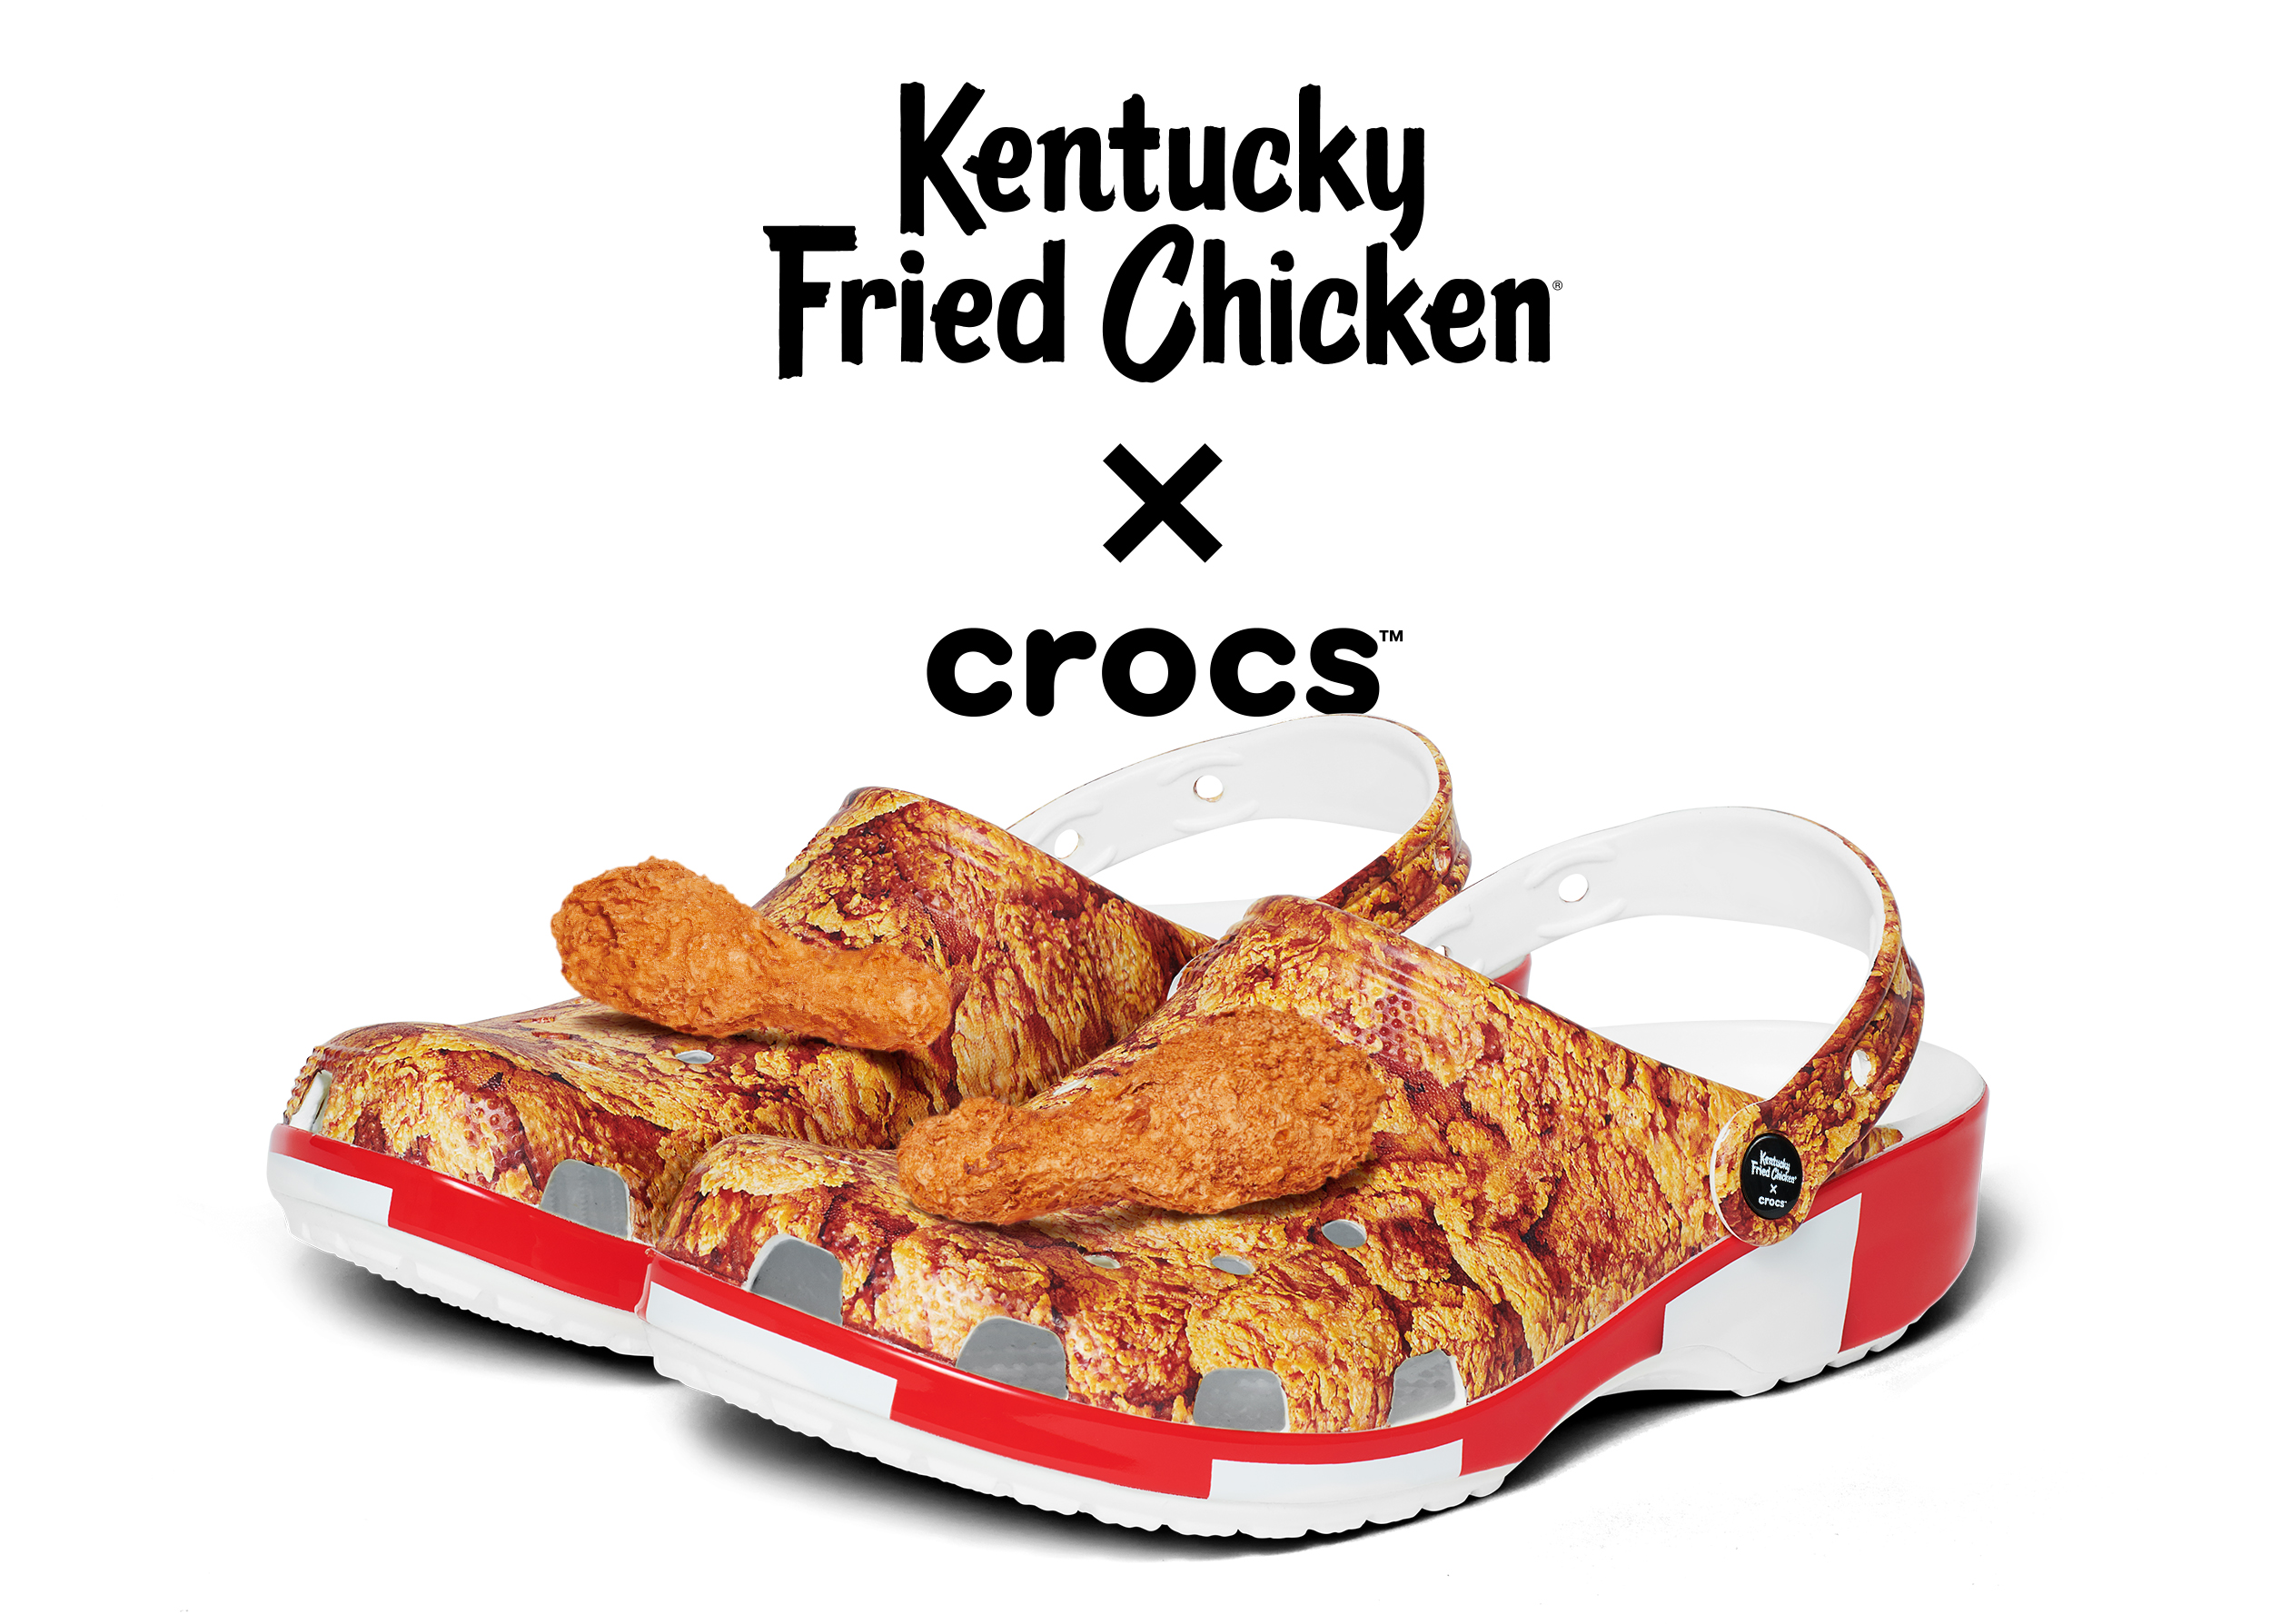 How the KFC Crocs shoe became the hottest item at Fashion Week - PR Daily